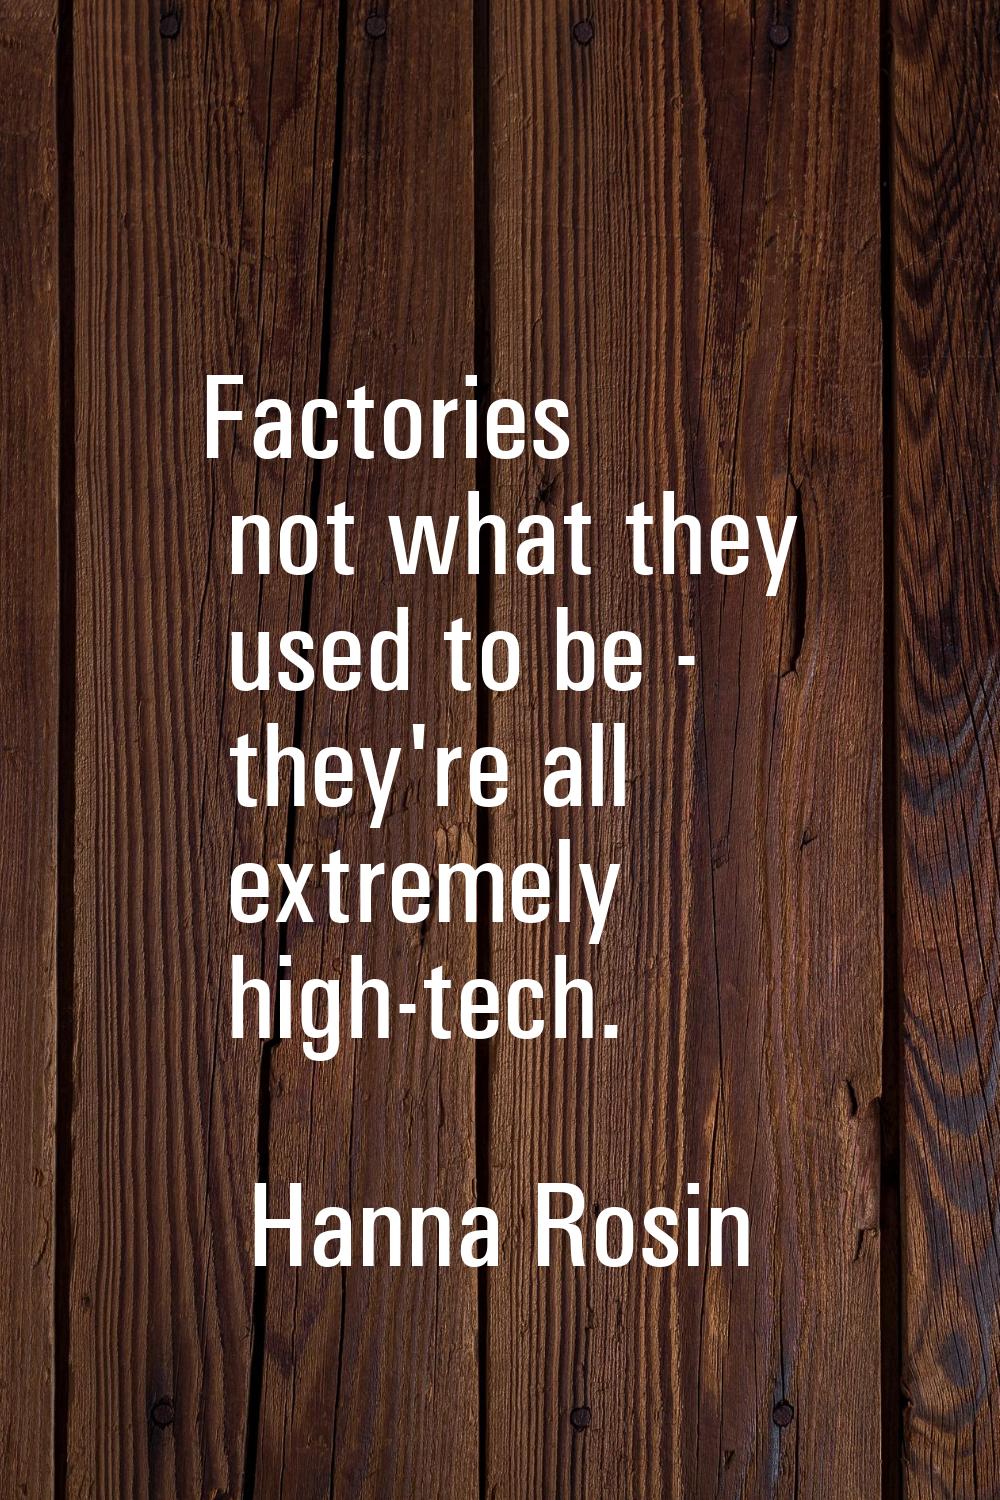 Factories not what they used to be - they're all extremely high-tech.